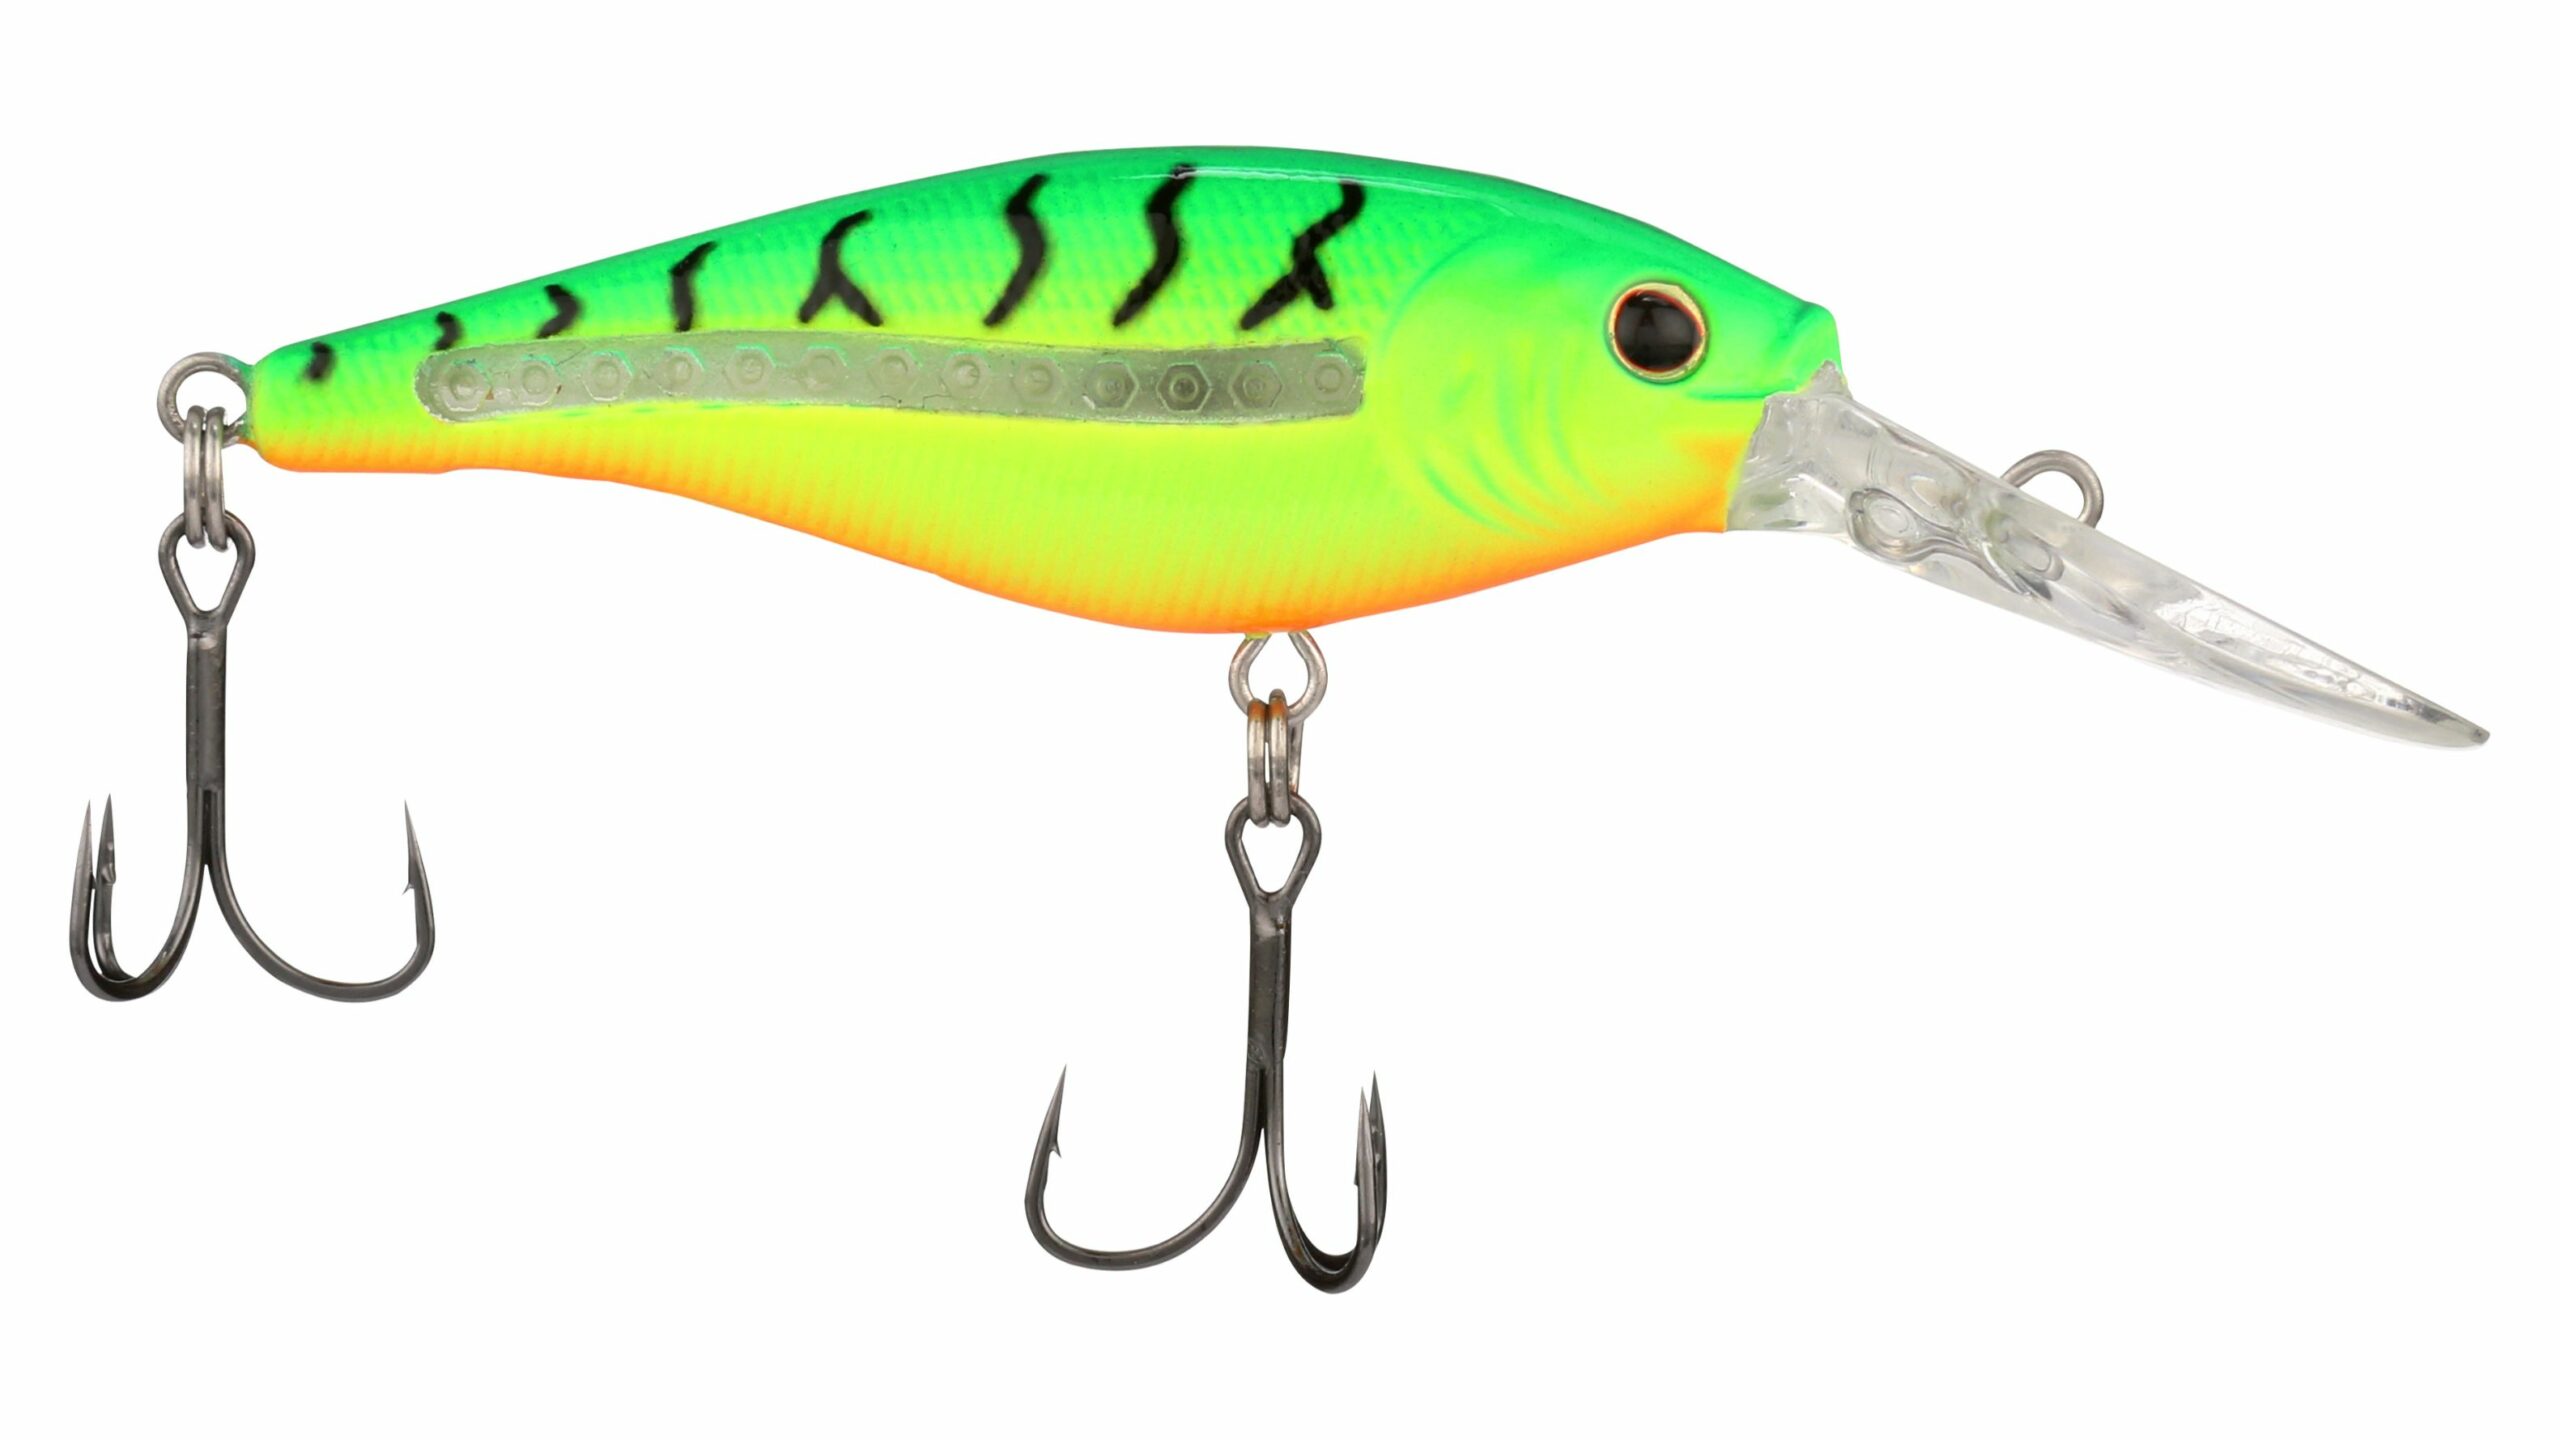 Fishing – Berkley introduce scent to hard baits with the Berkley Scented  Flicker Shad